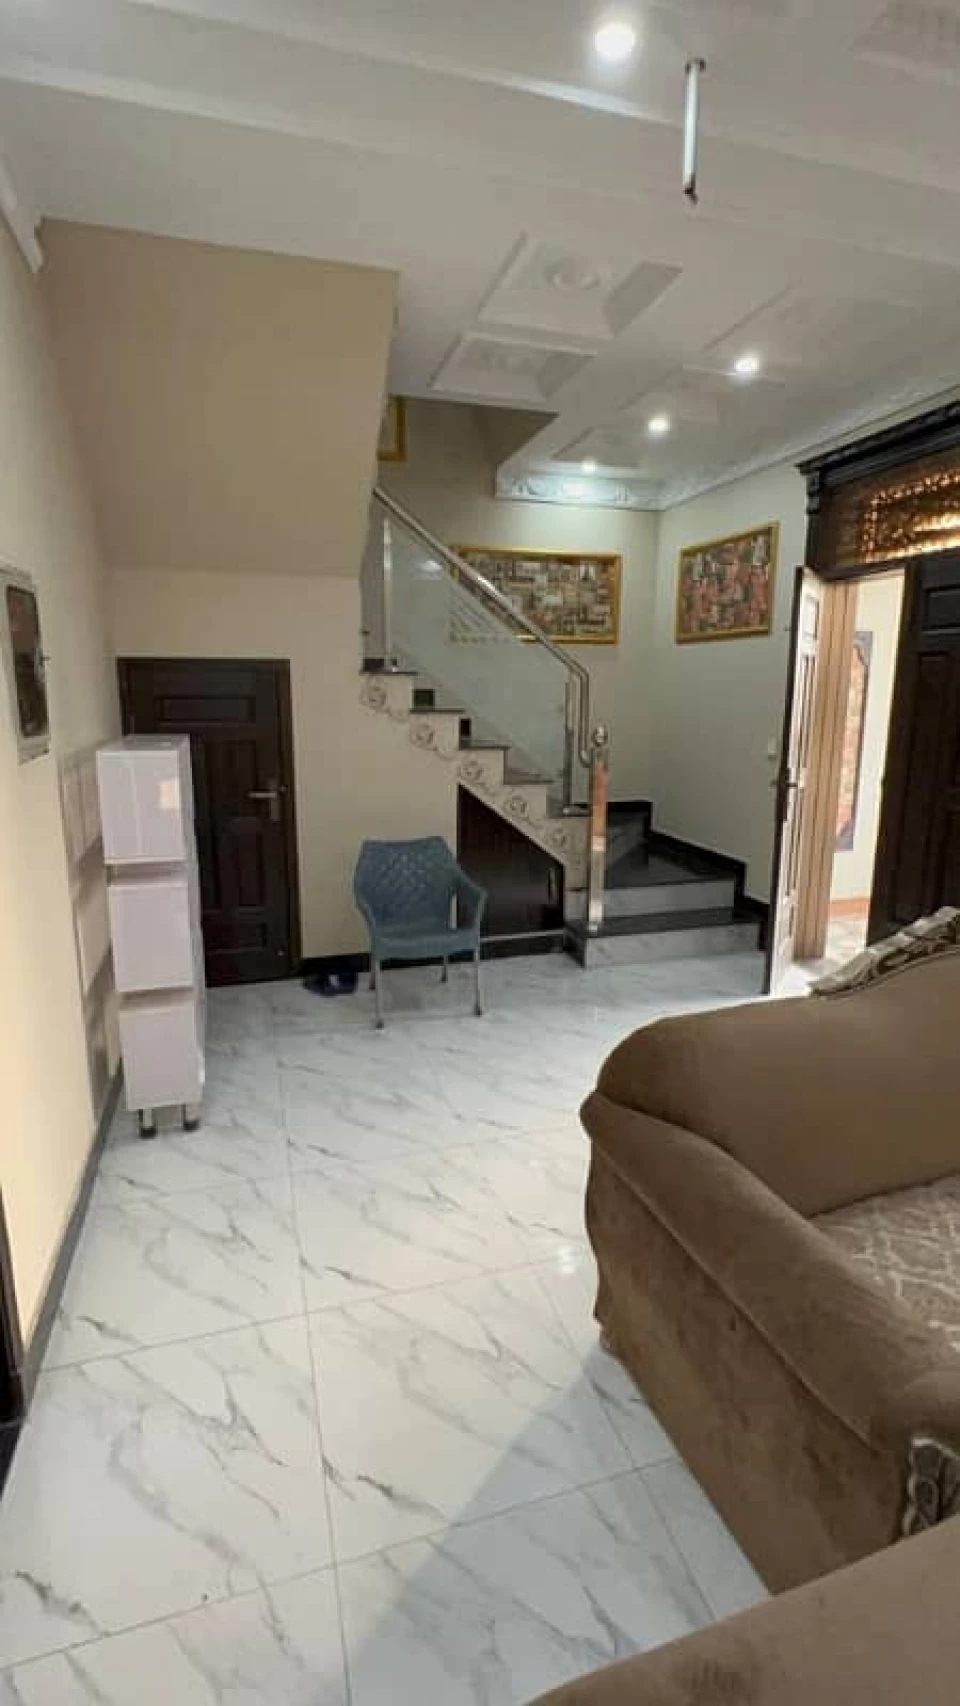 House For Sale in Lahore , House For Sale in Park View Villas , House For Sale in Park View Villas Lahore , House For Sale in Park View Villas , 5 Brand New Modern Design House For Sale In Park View City , Park View Villas, Lahore Pakistan,4 Bedrooms Bedrooms, 4 BathroomsBathrooms, House,For Sale,2530